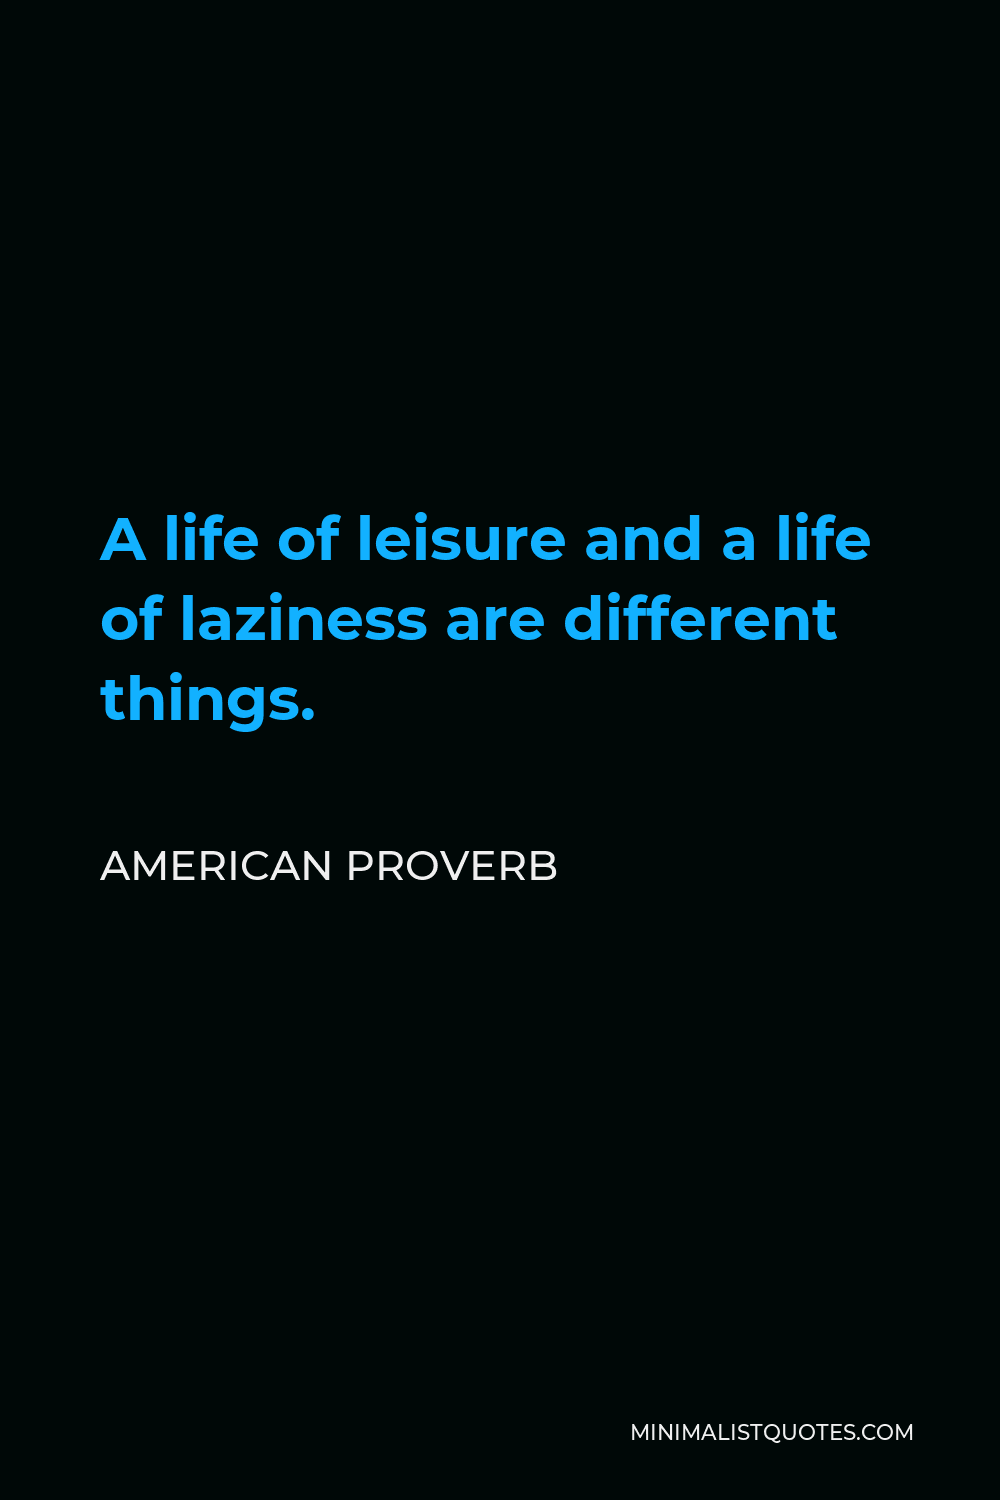 American Proverb Quote - A life of leisure and a life of laziness are different things.